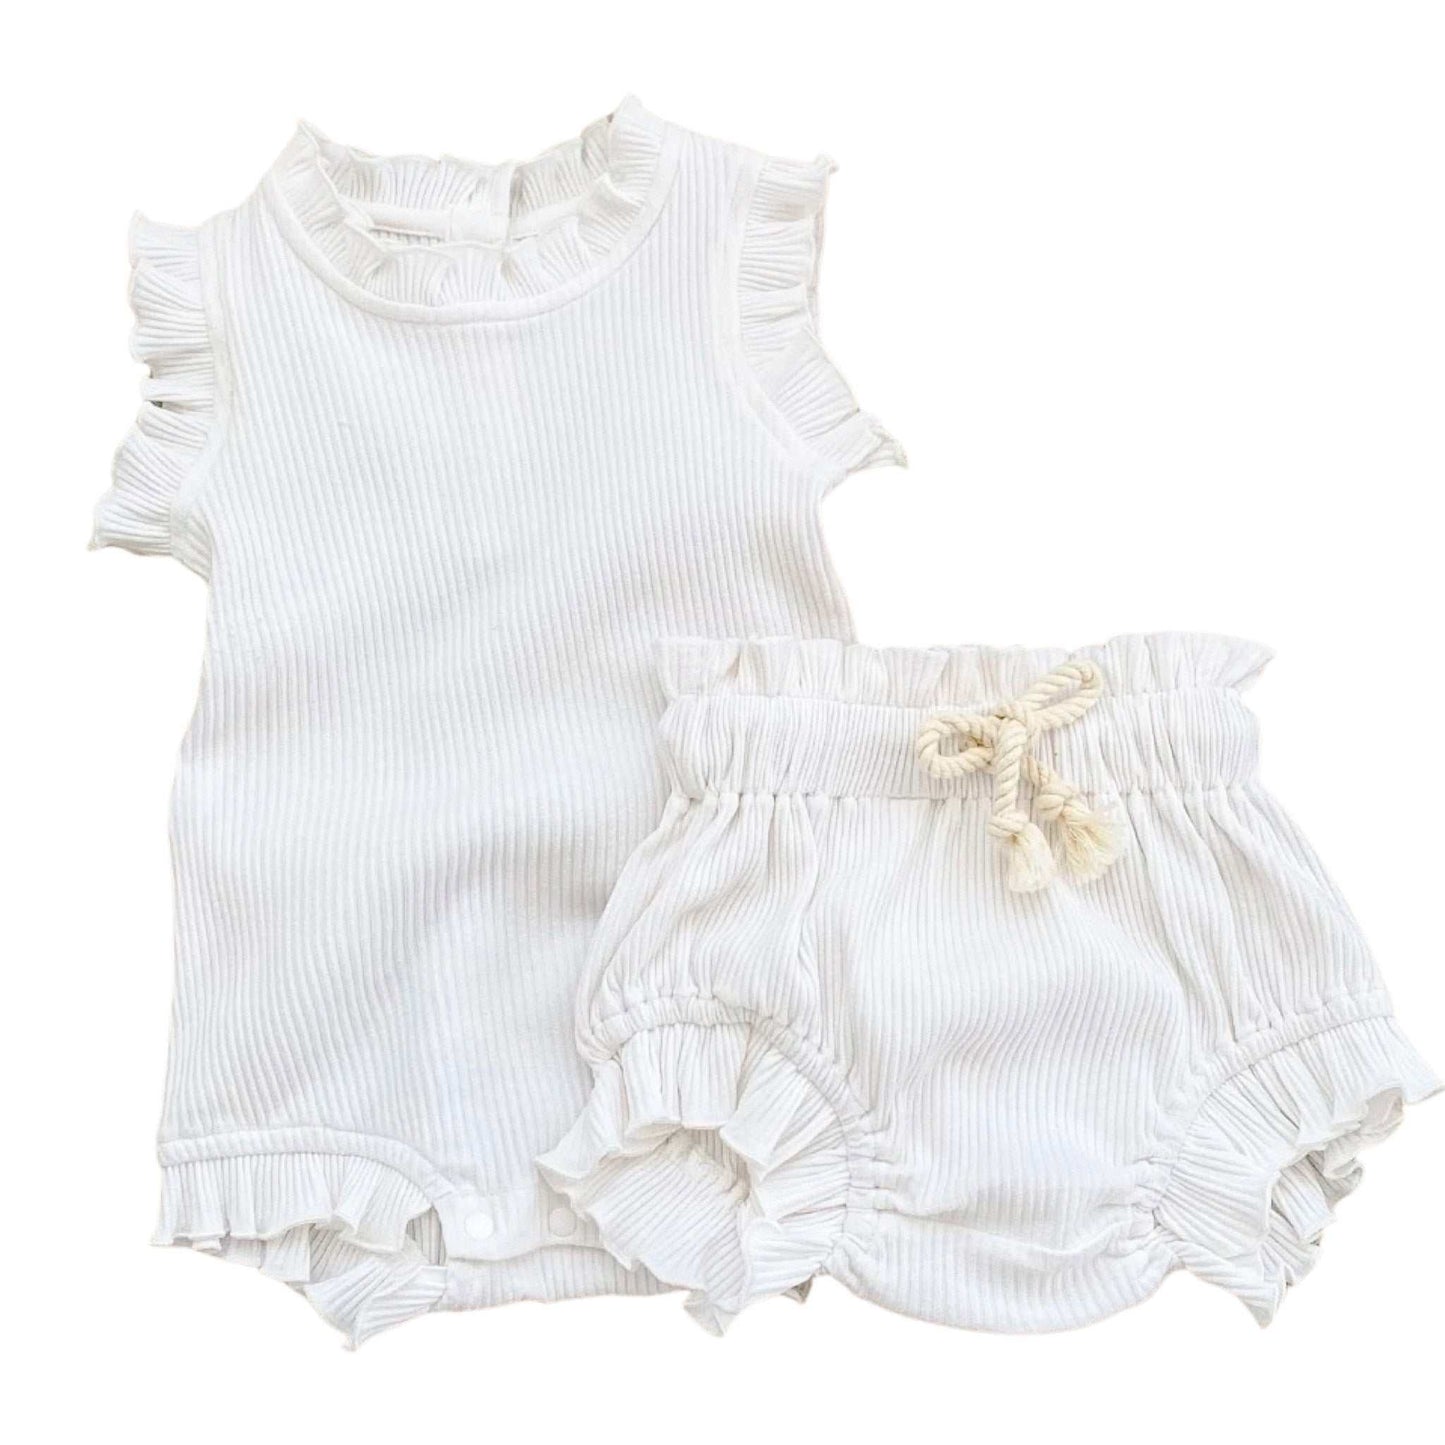 Baby Girl Clothing - Frill Romper and Shorts Set